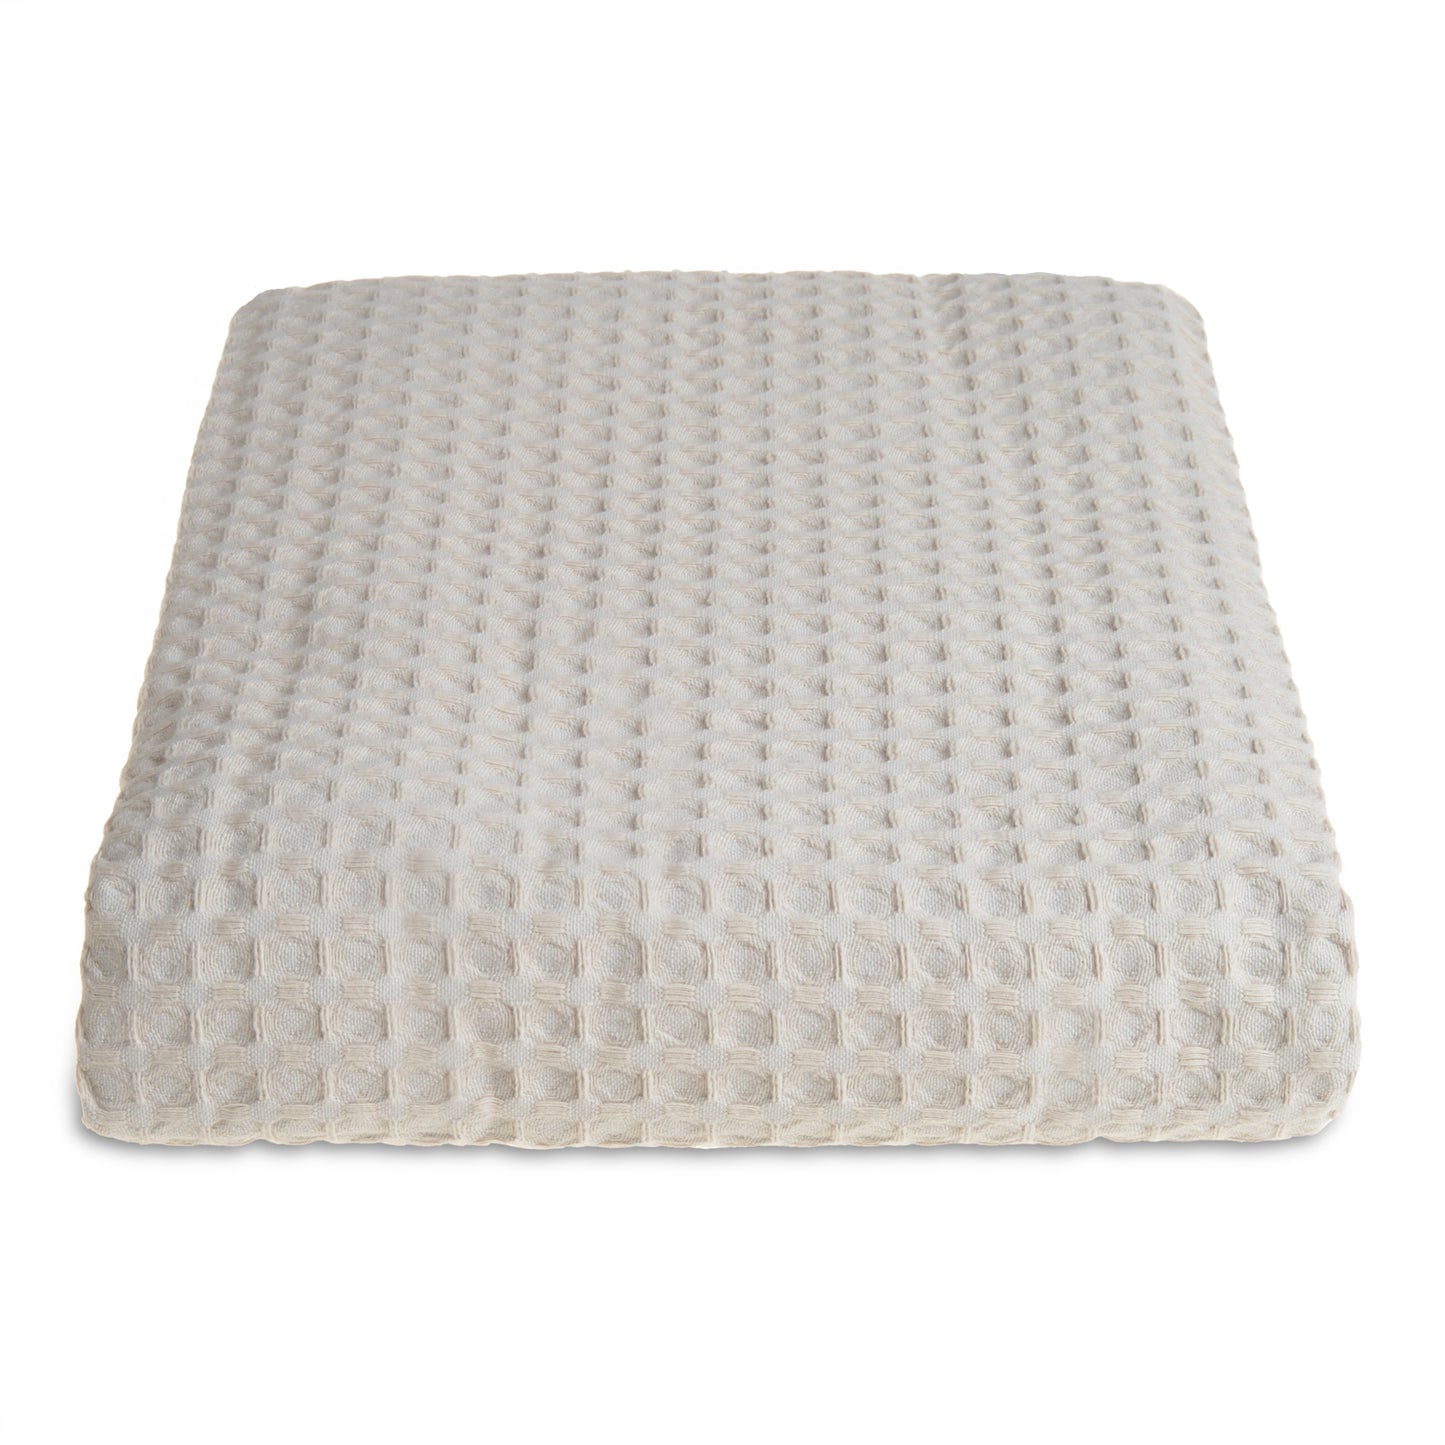 100% Cotton Hotel Waffle Weave Throw Taupe